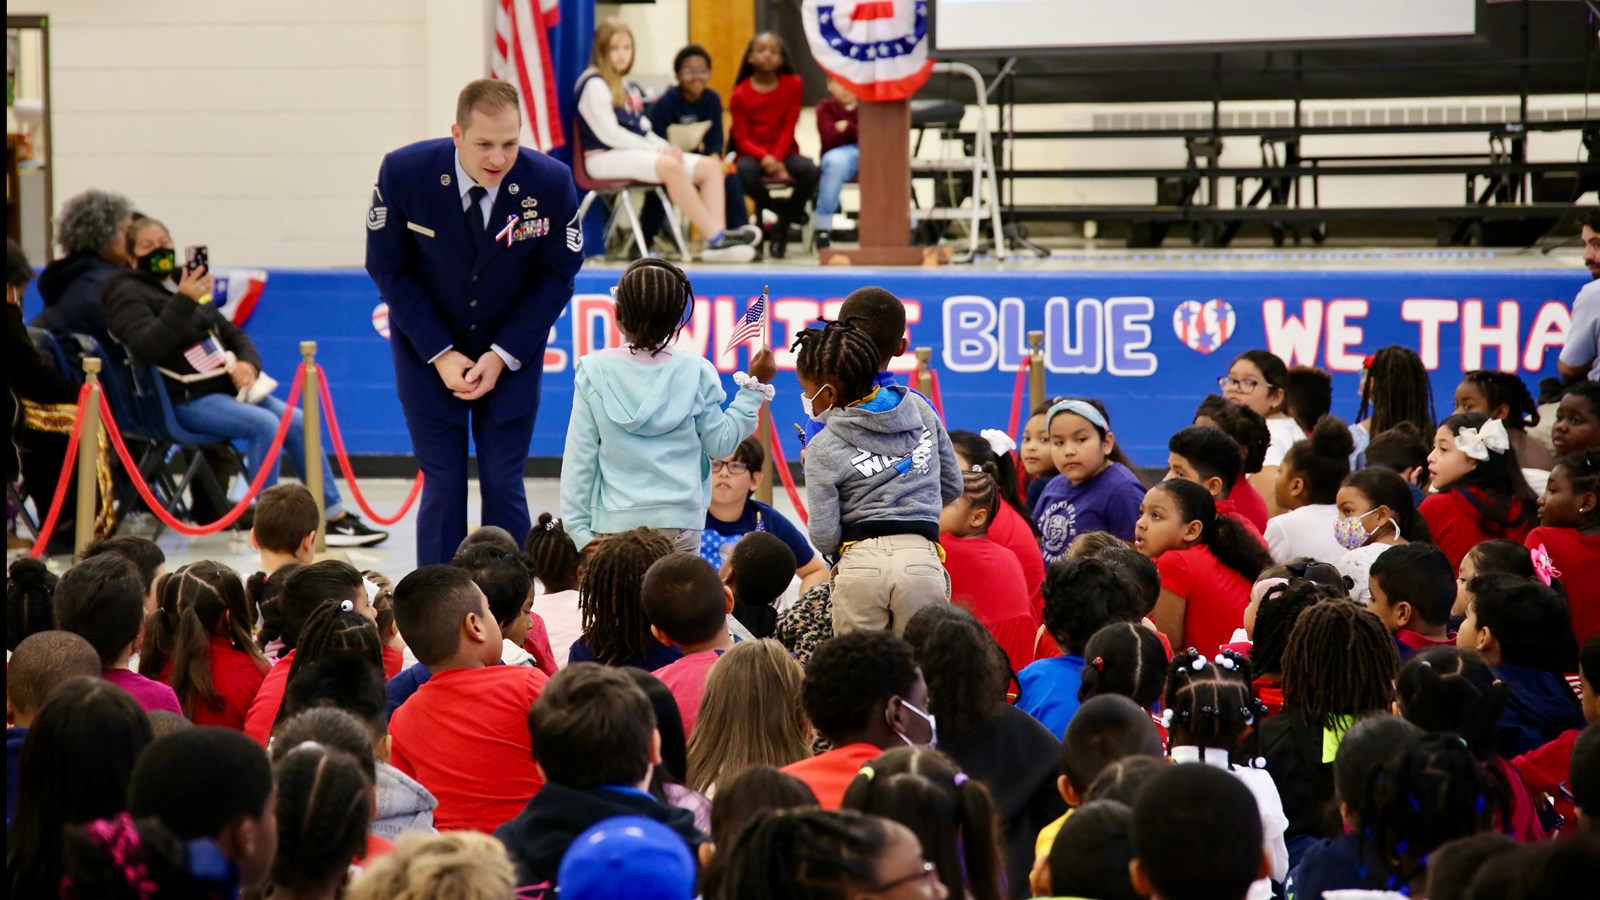 Argyle Elementary School honors those who have served in the U.S. military as part of the school’s Veterans Day celebration.